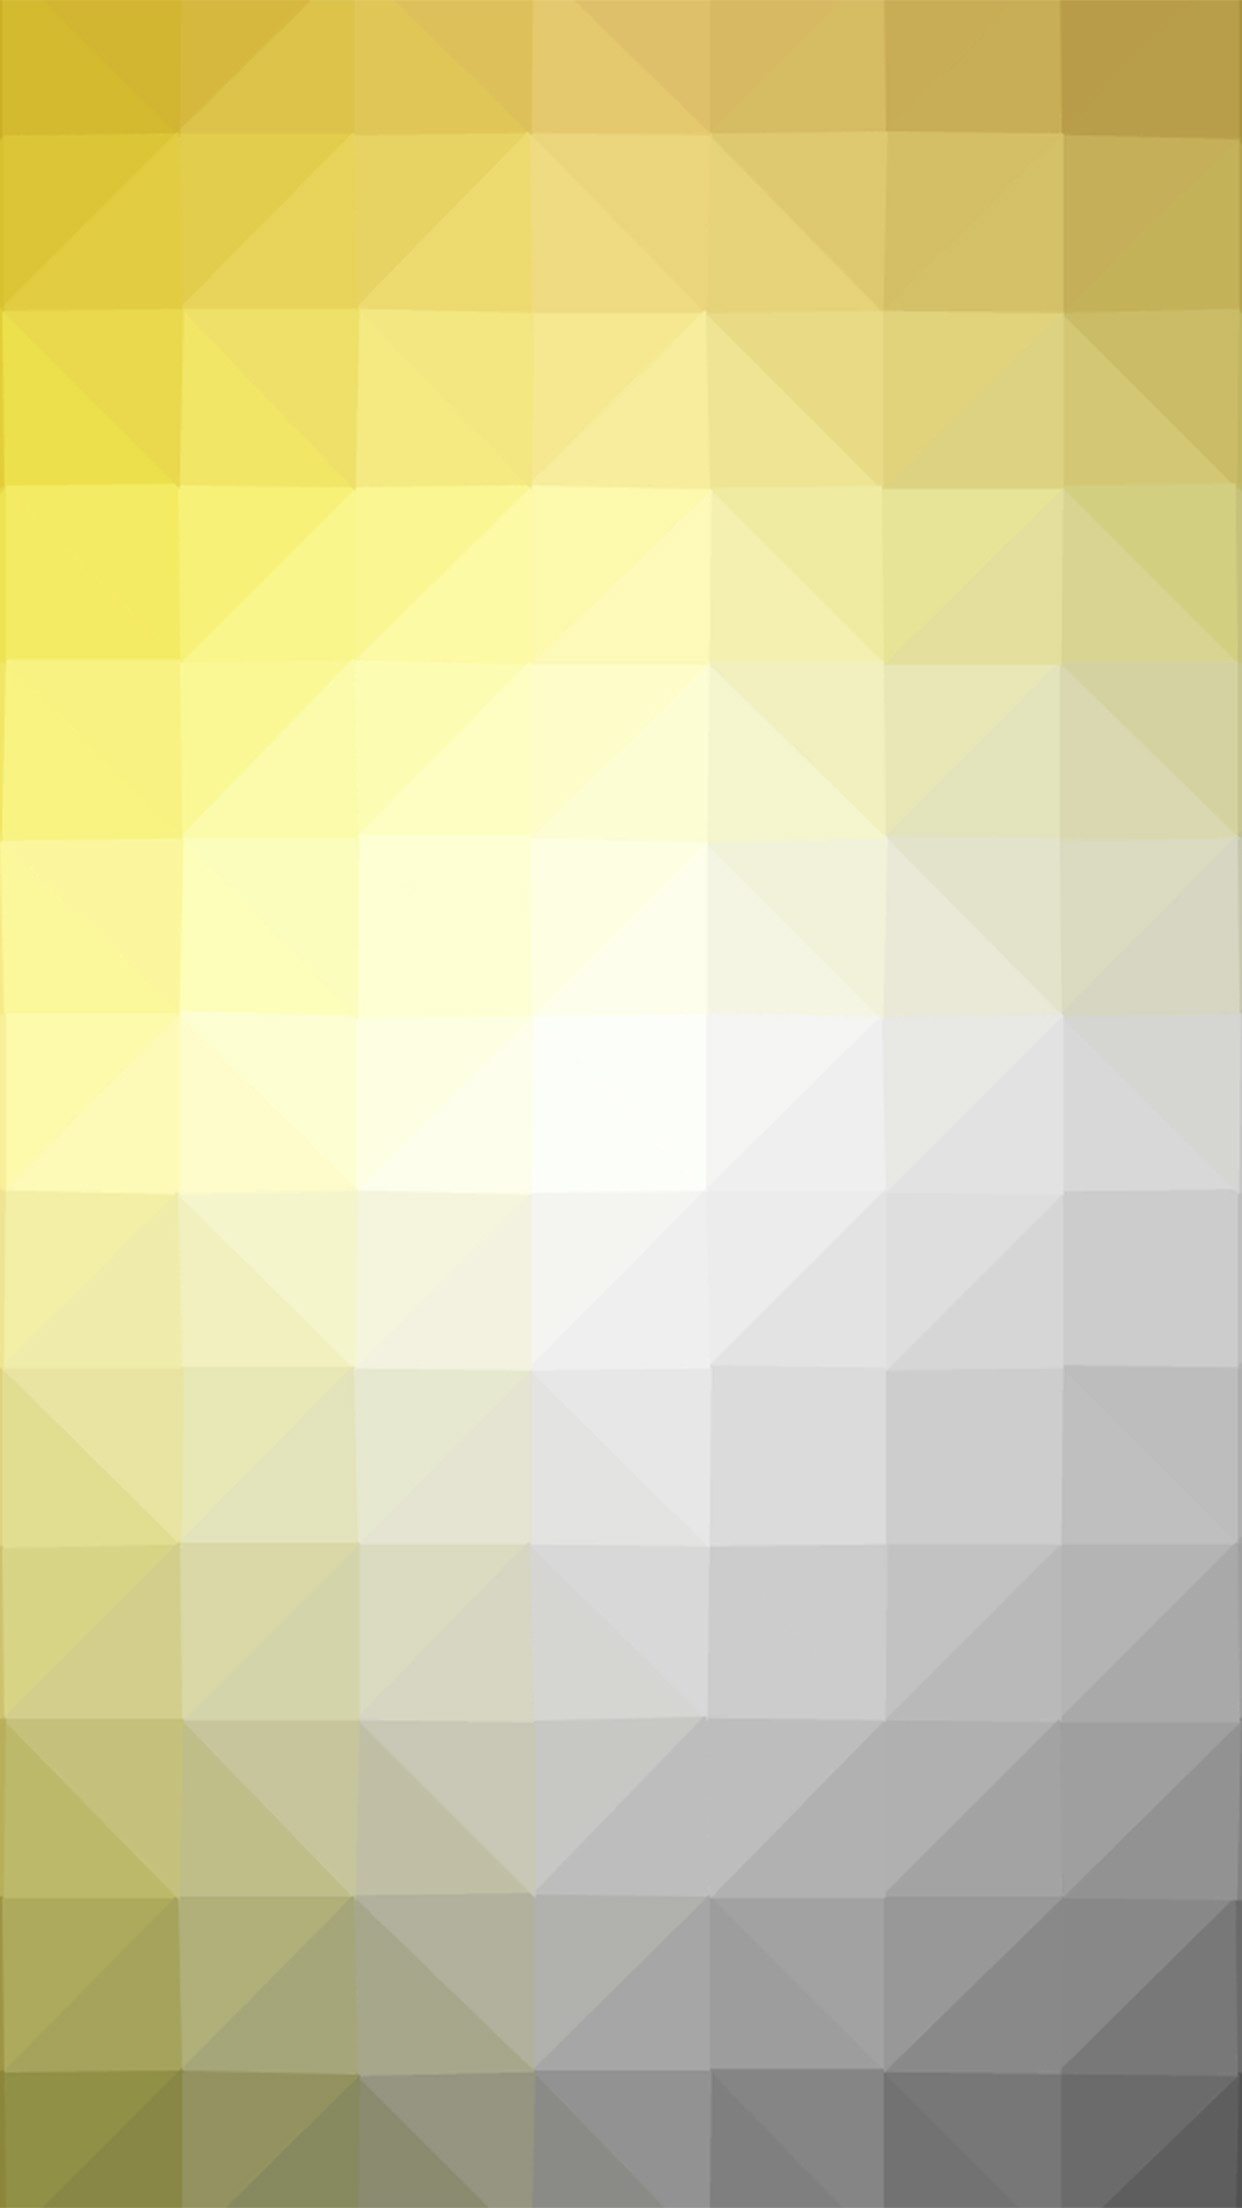 Tri Abstract Yellow Pattern Android wallpaper